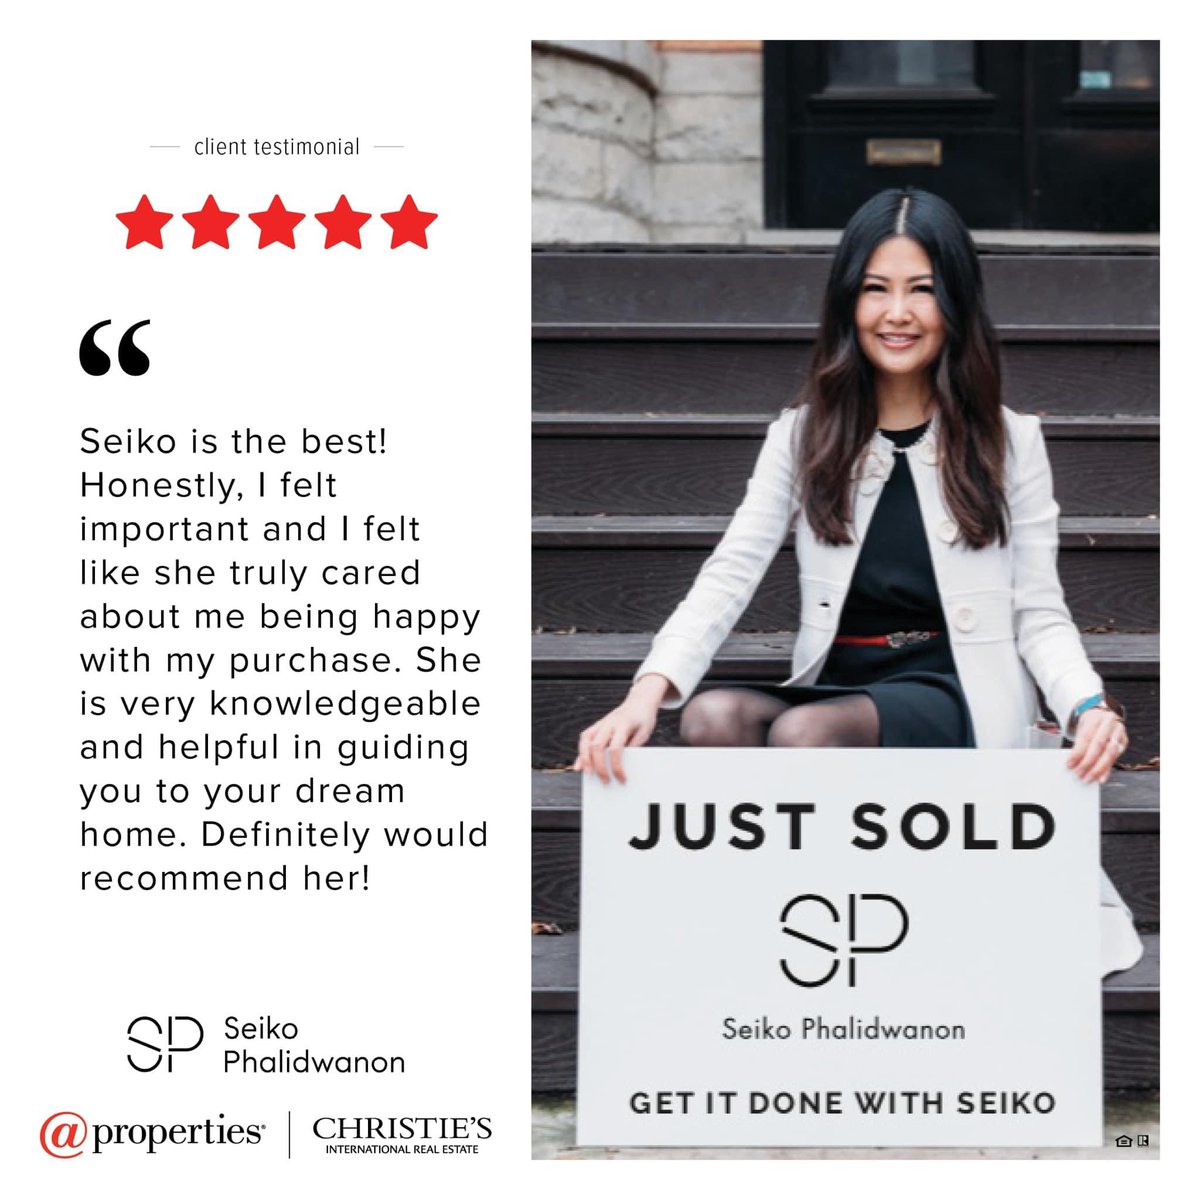 Another happy client testimonial❤️ I’m so happy for my client! #getitdonewithseiko #happyhomeowners #happyclients #atproperties #justsold #testimonial #dowhatyoulovelovewhatyoudo